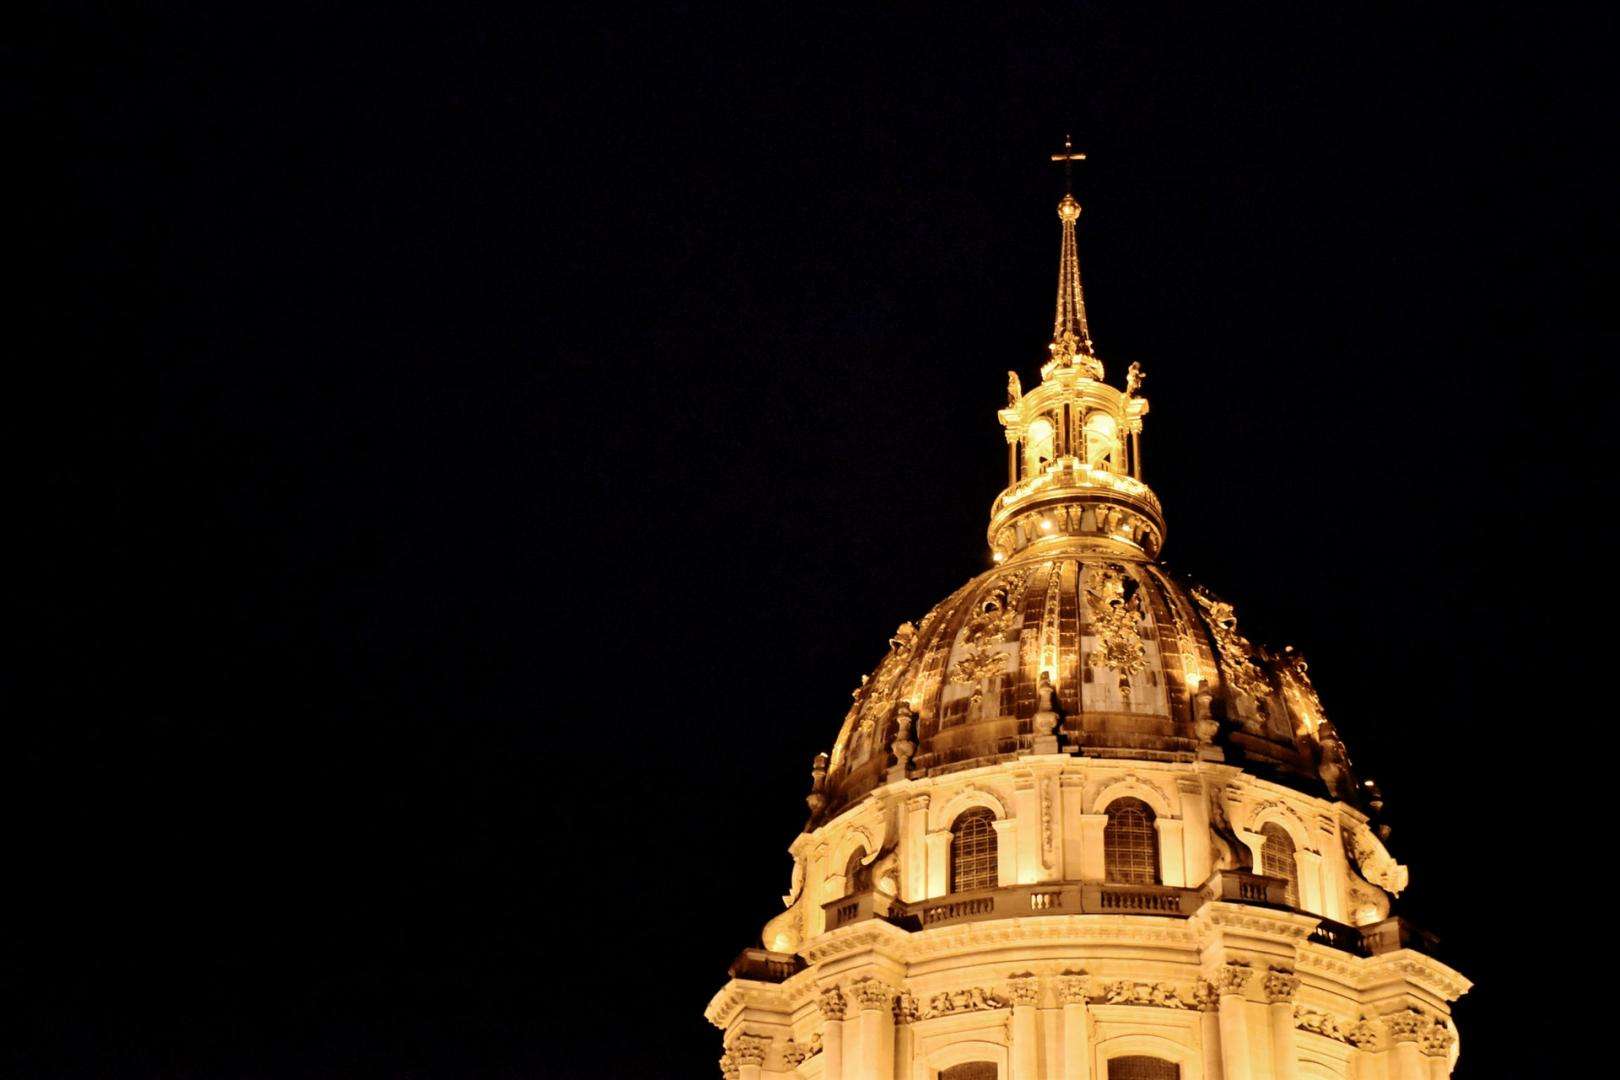 A colourful encounter with history: a Night at the Invalides